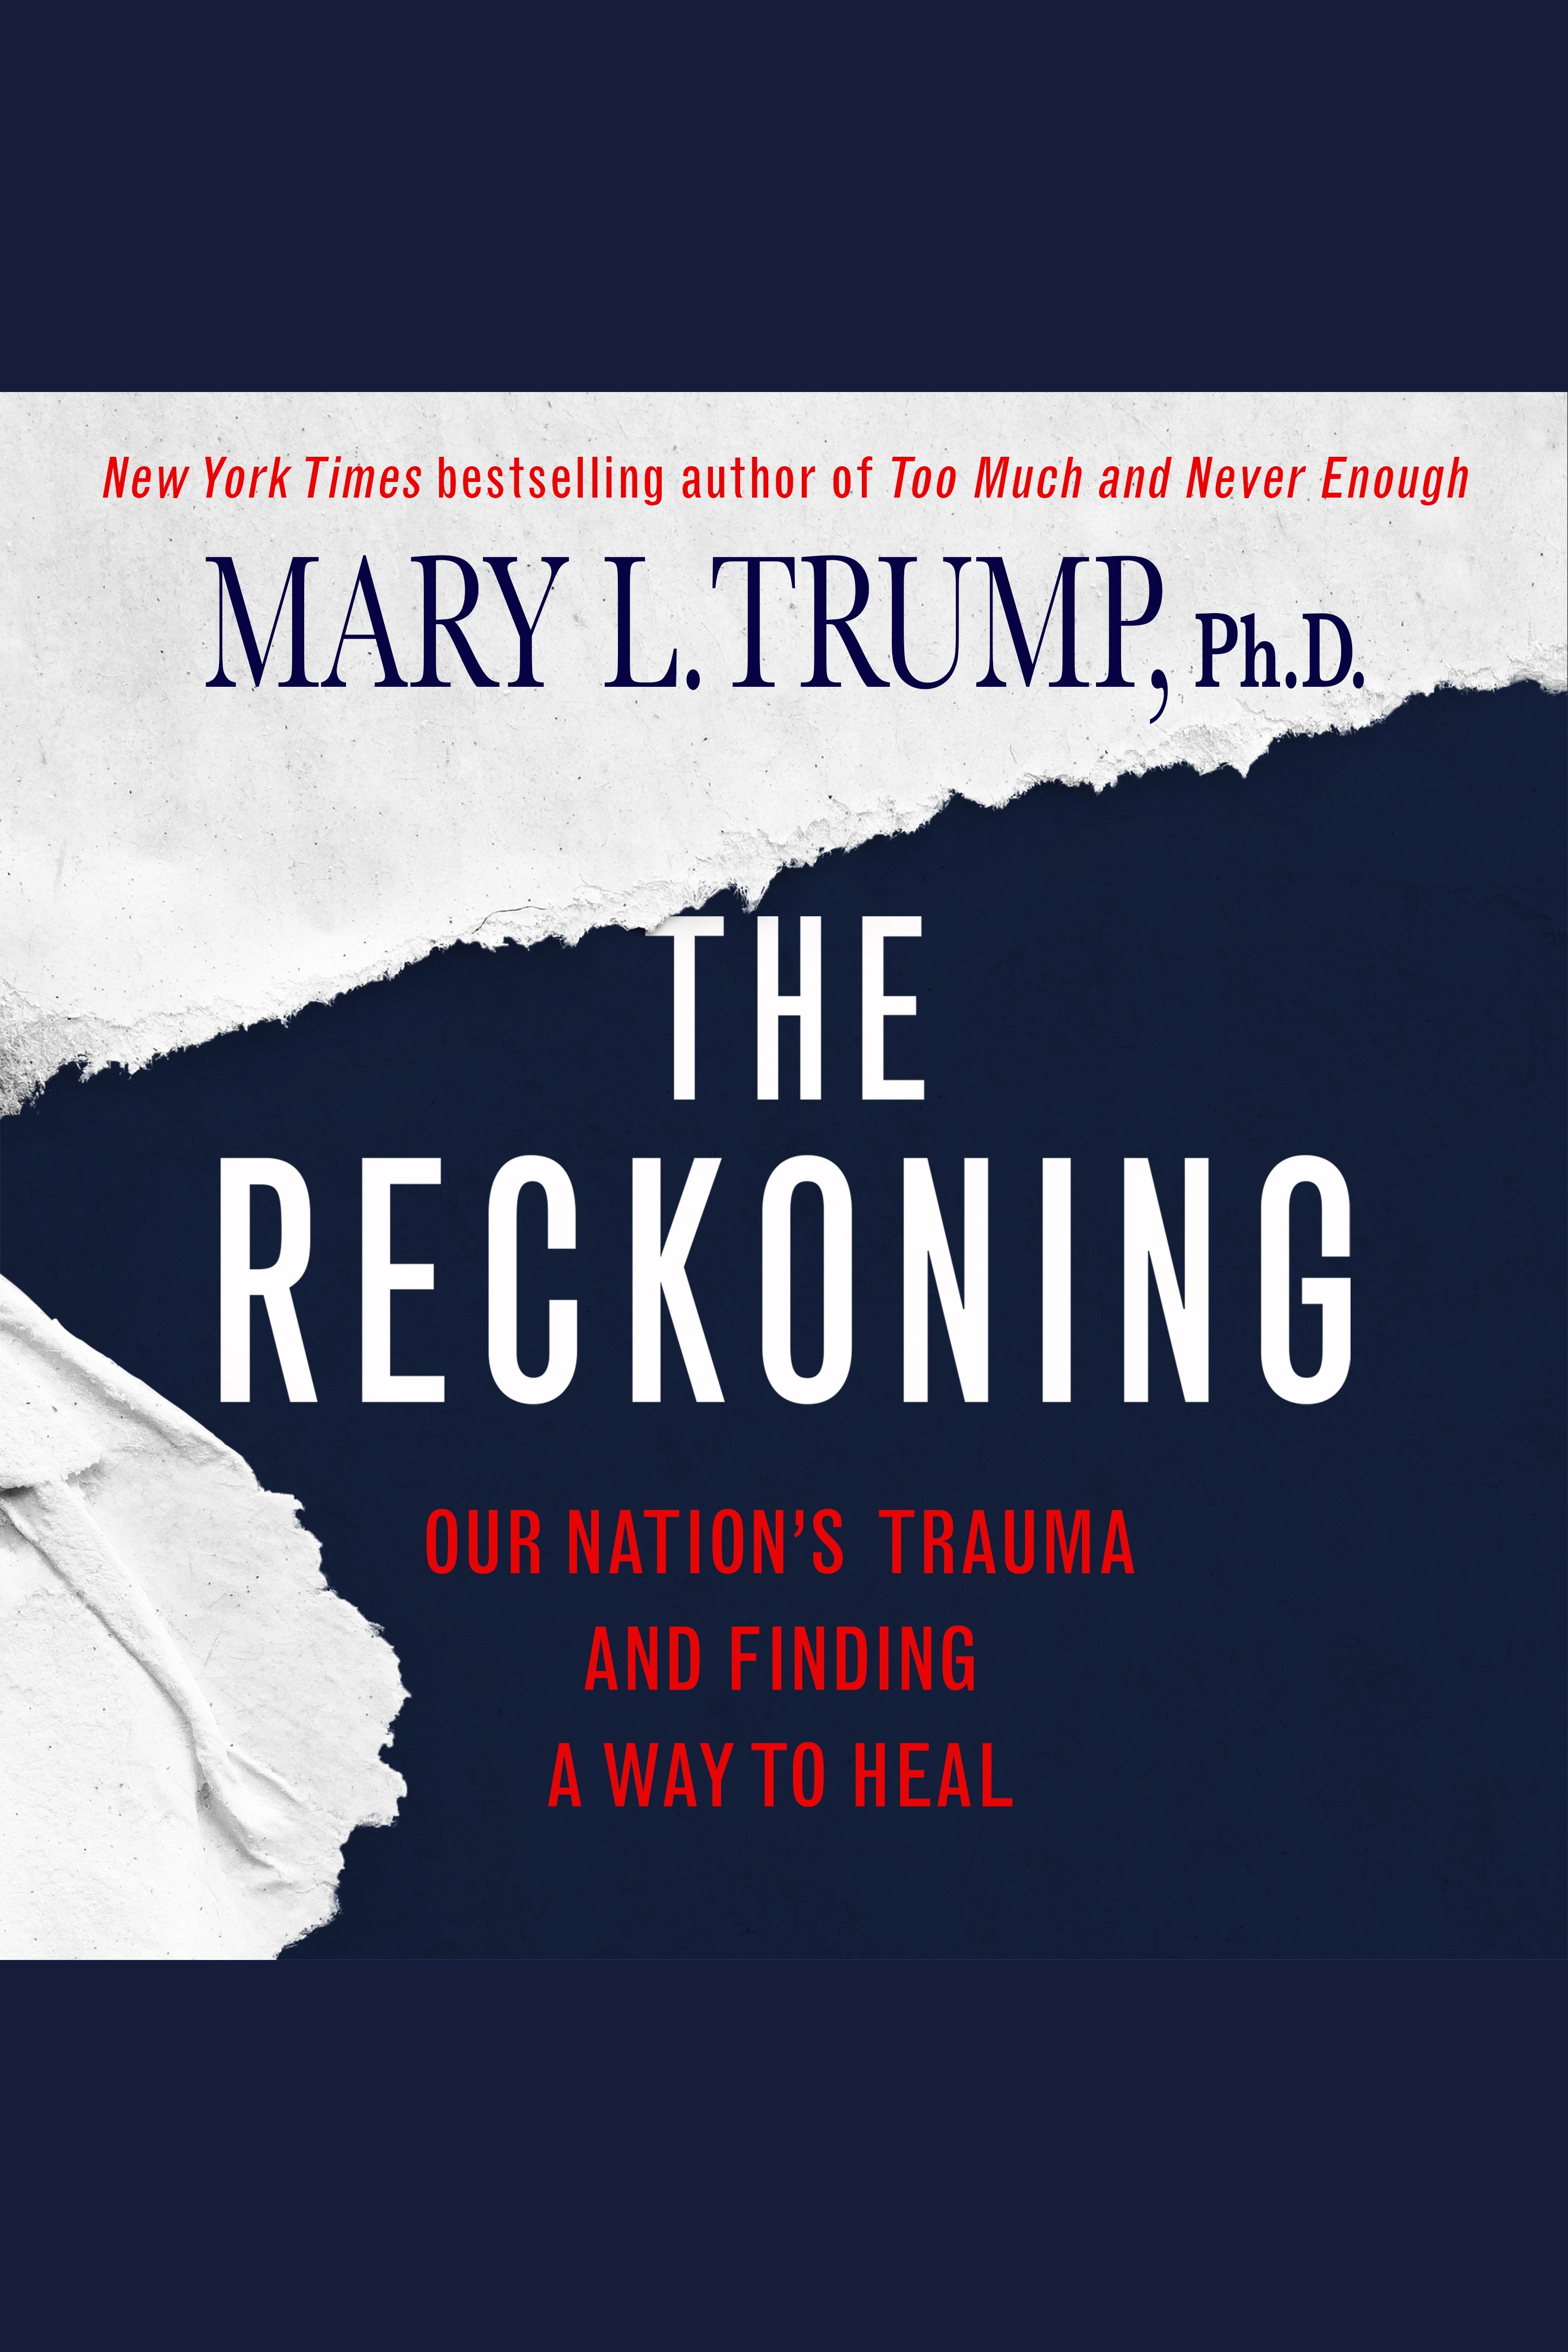 The Reckoning Our Nation's Trauma and Finding a Way to Heal cover image